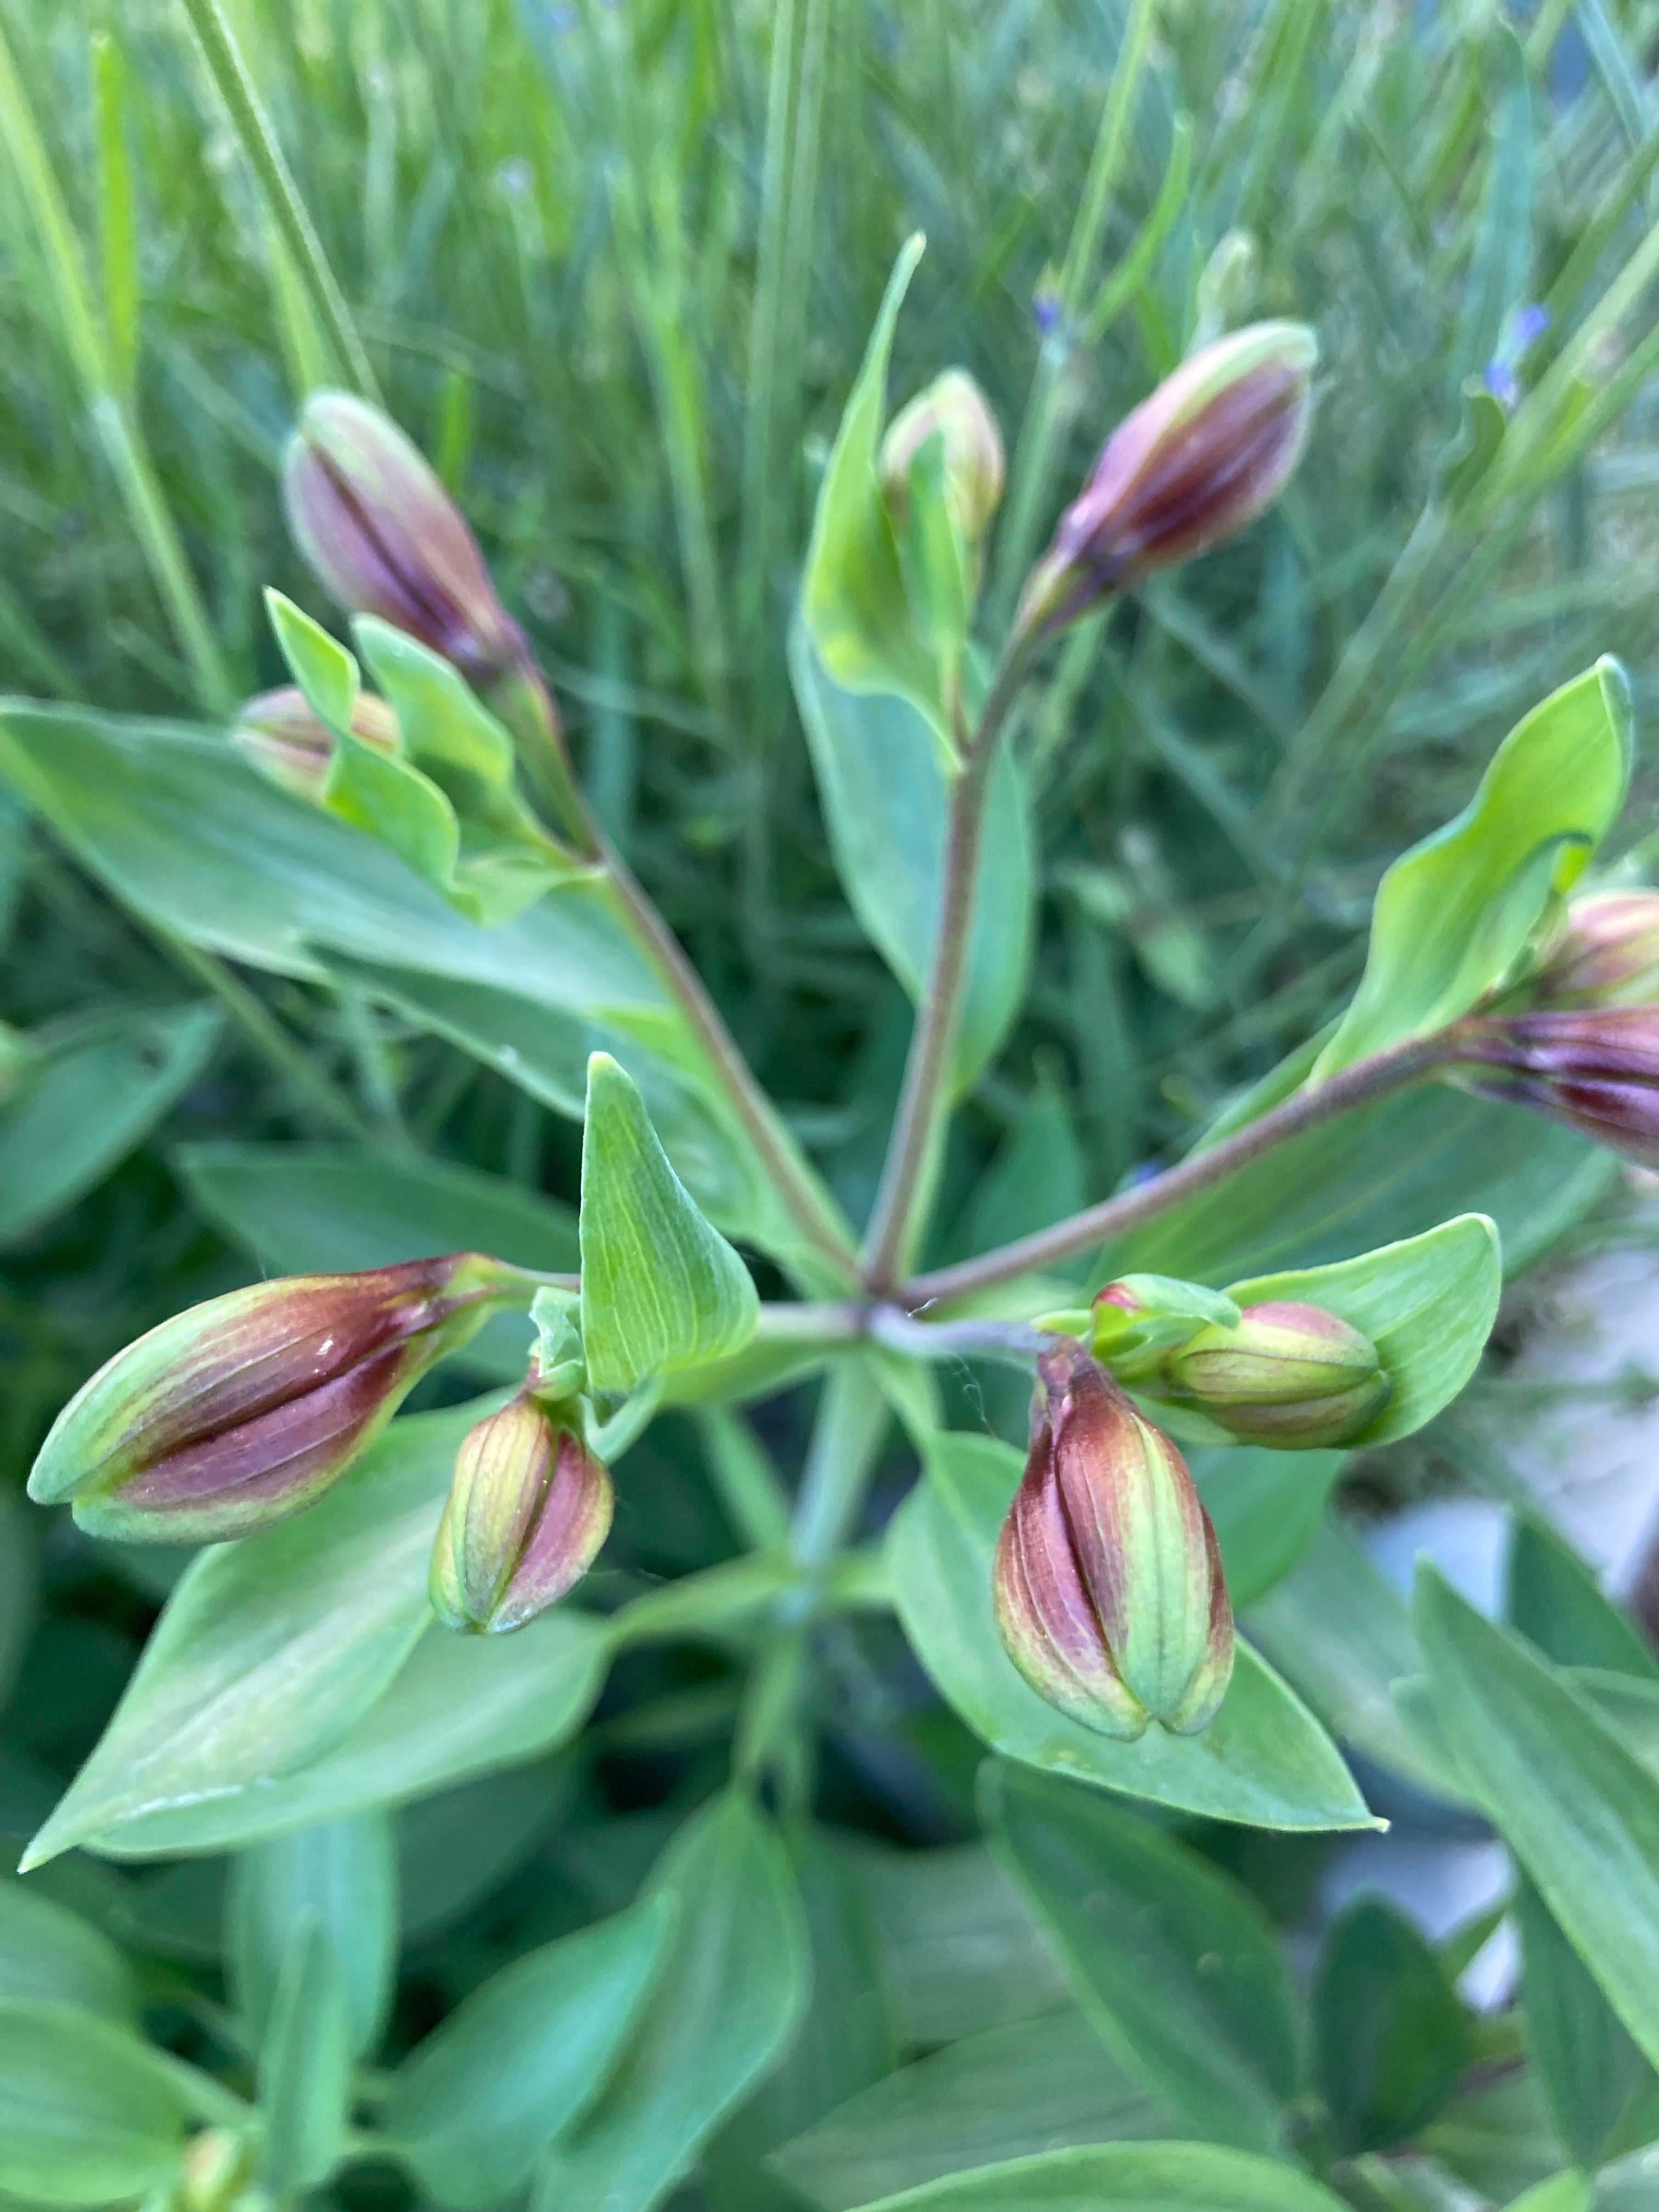 Alstroemeria or Peruvian Lily (Budding Sections of Bare Root) Free UK Postage